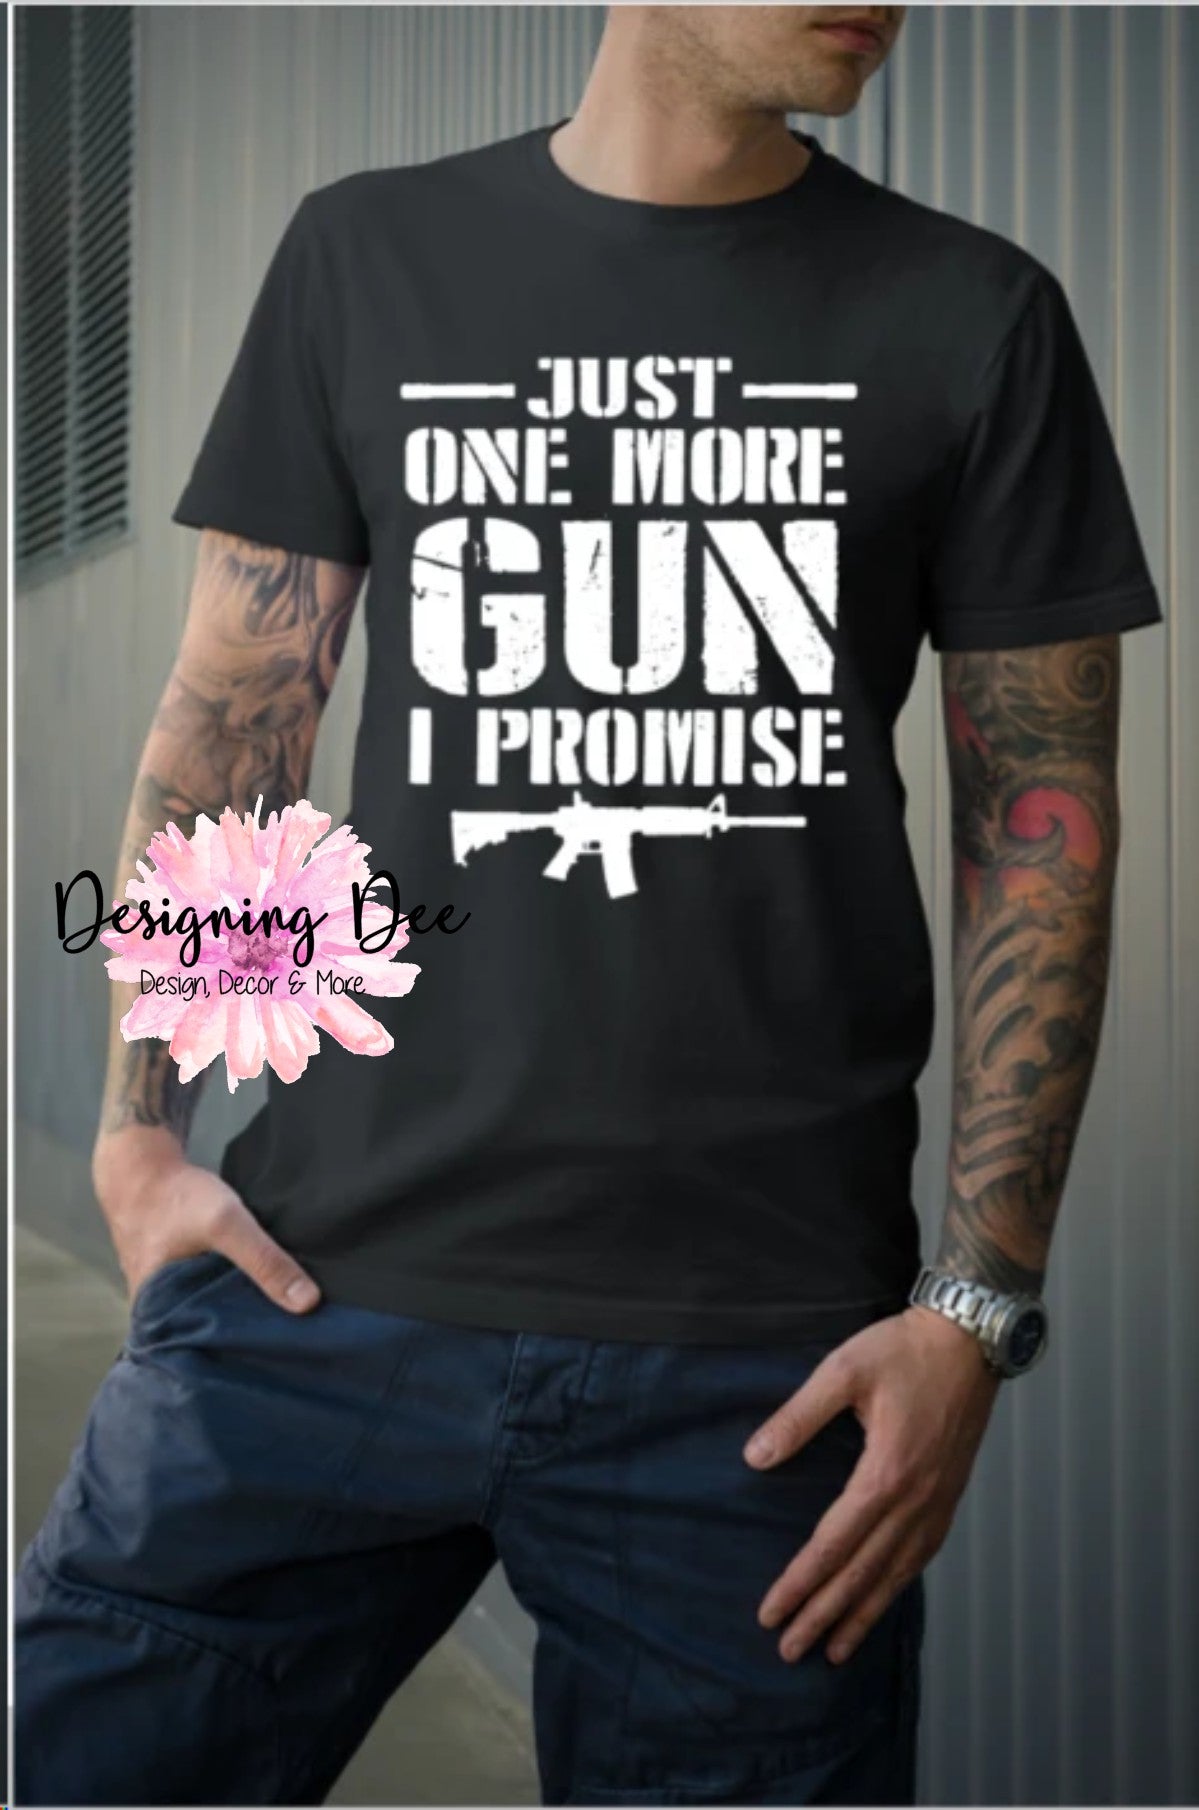 Just One More Gun I Promise Graphic T-shirt for Men